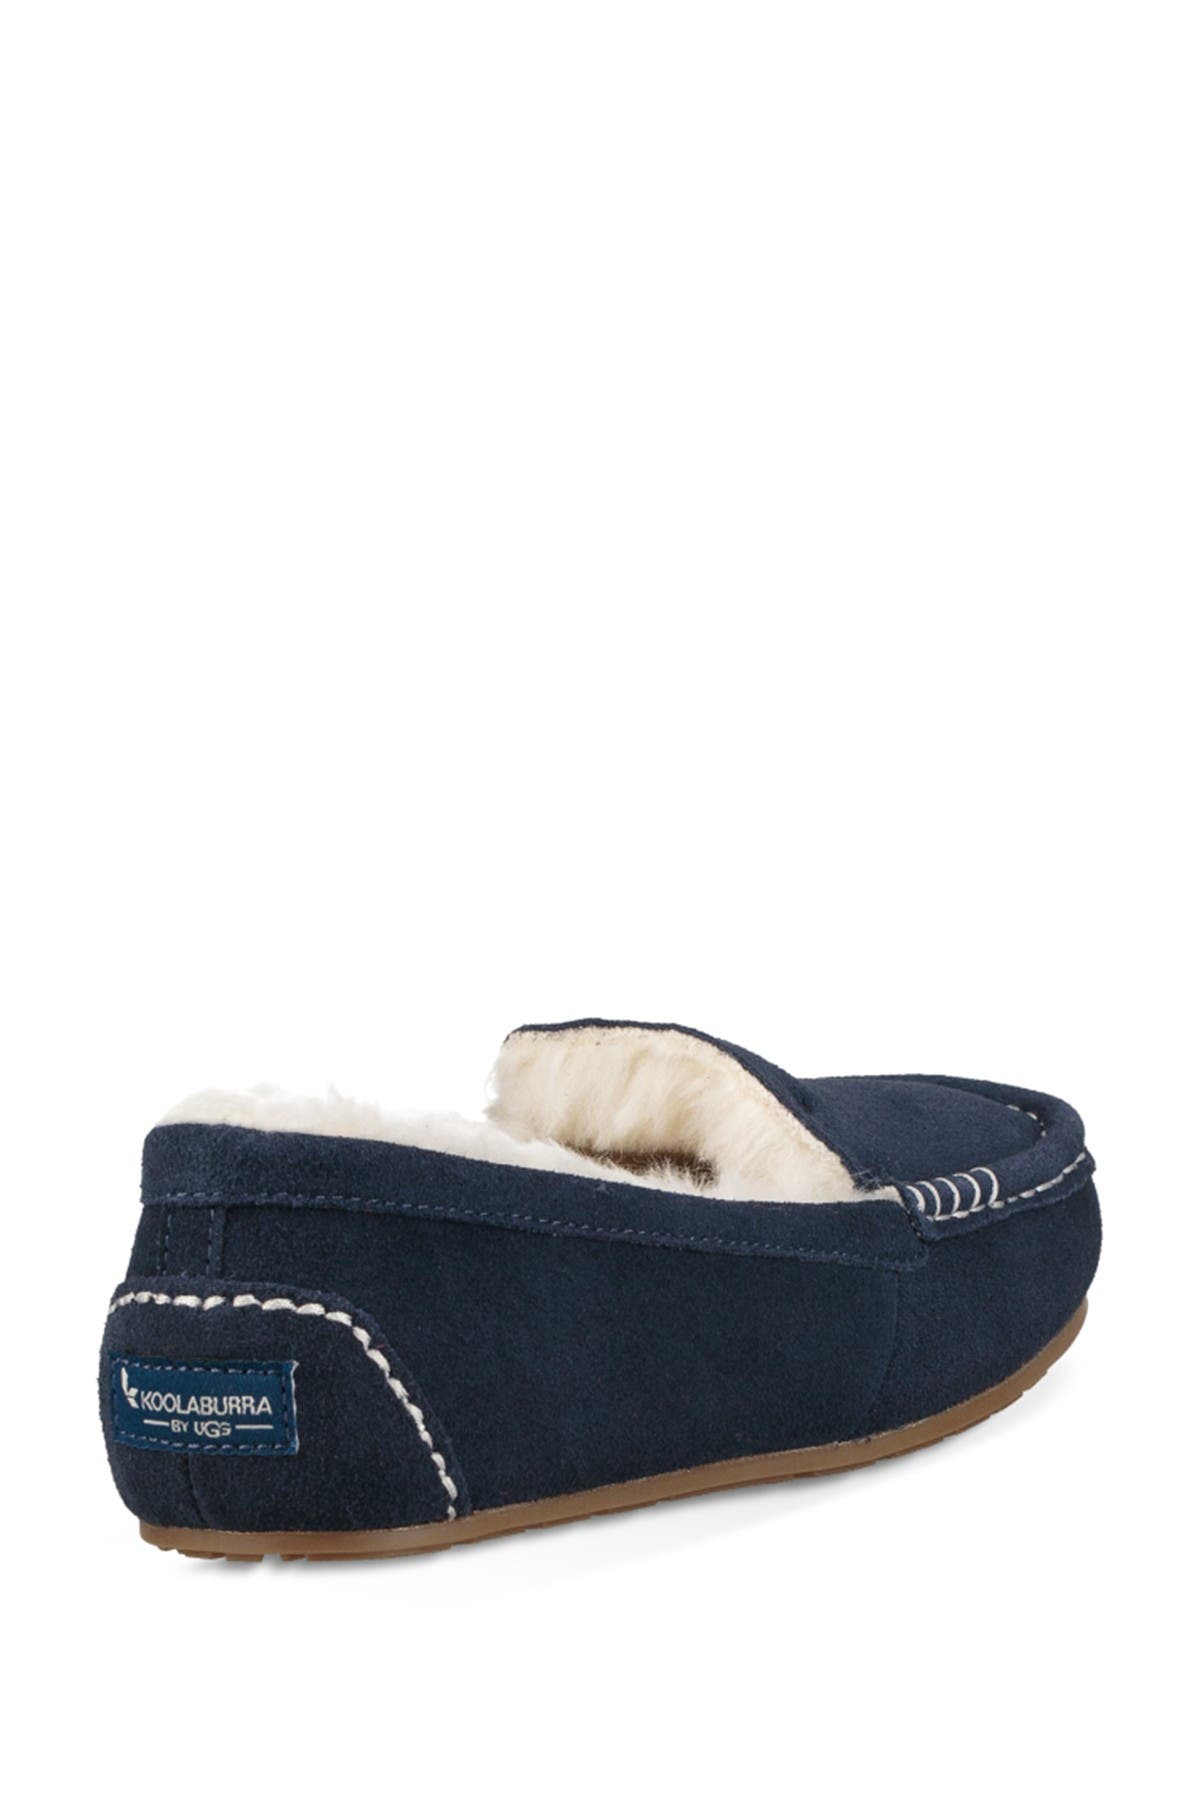 Koolaburra By Ugg Lezly Faux Fur Lined Moccasin In Bright Blue1